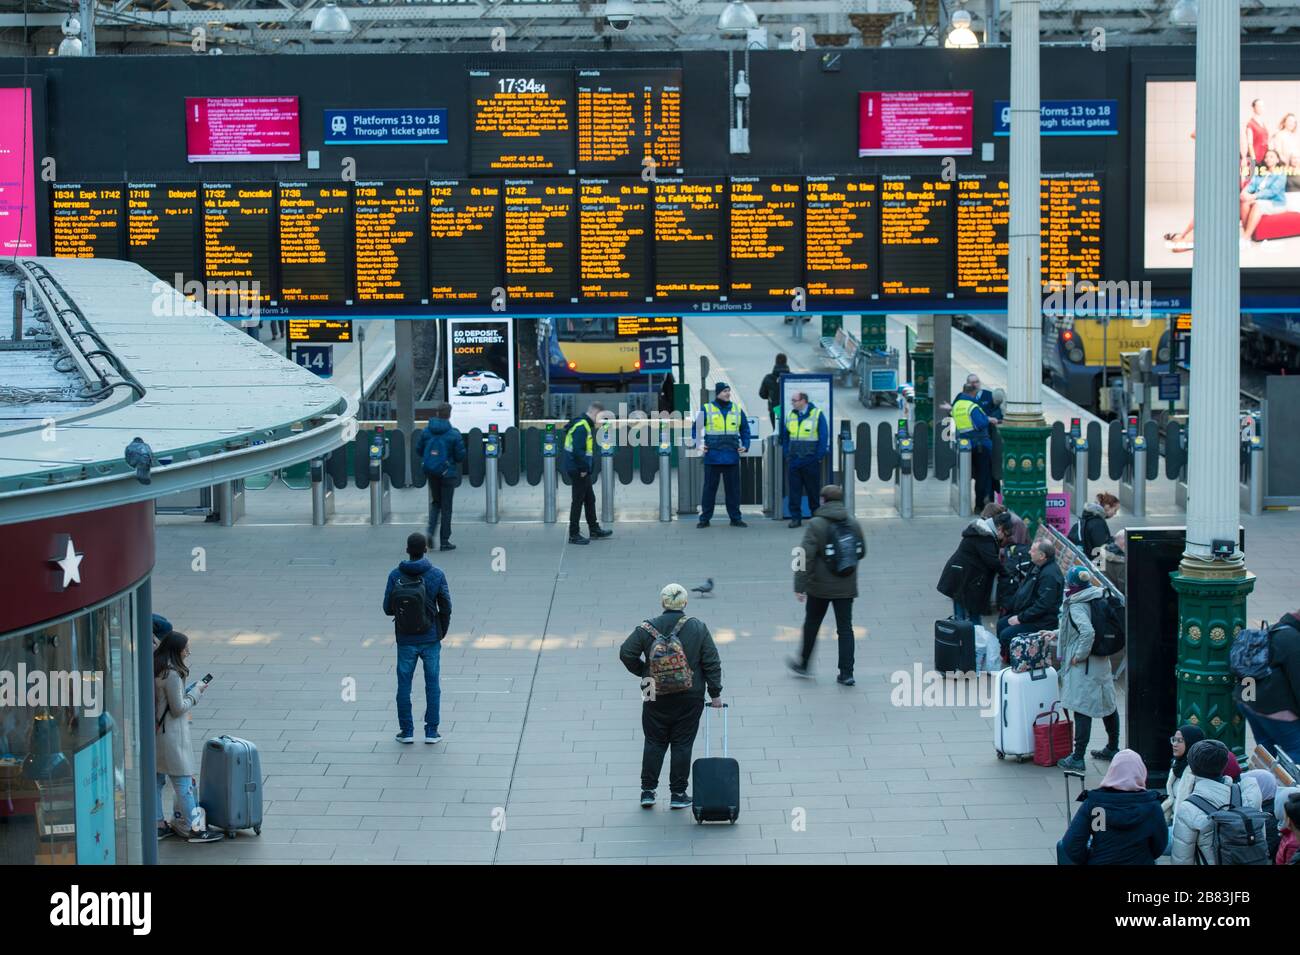 Edinburgh, UK. 19th Mar, 2020. Pictured: Waverley Station during rush hour during the Coronavirus Pandemic. What would normally be hustle and bustle packed with commuters trying to get home, a more or less empty concourse. Credit: Colin Fisher/Alamy Live News Stock Photo